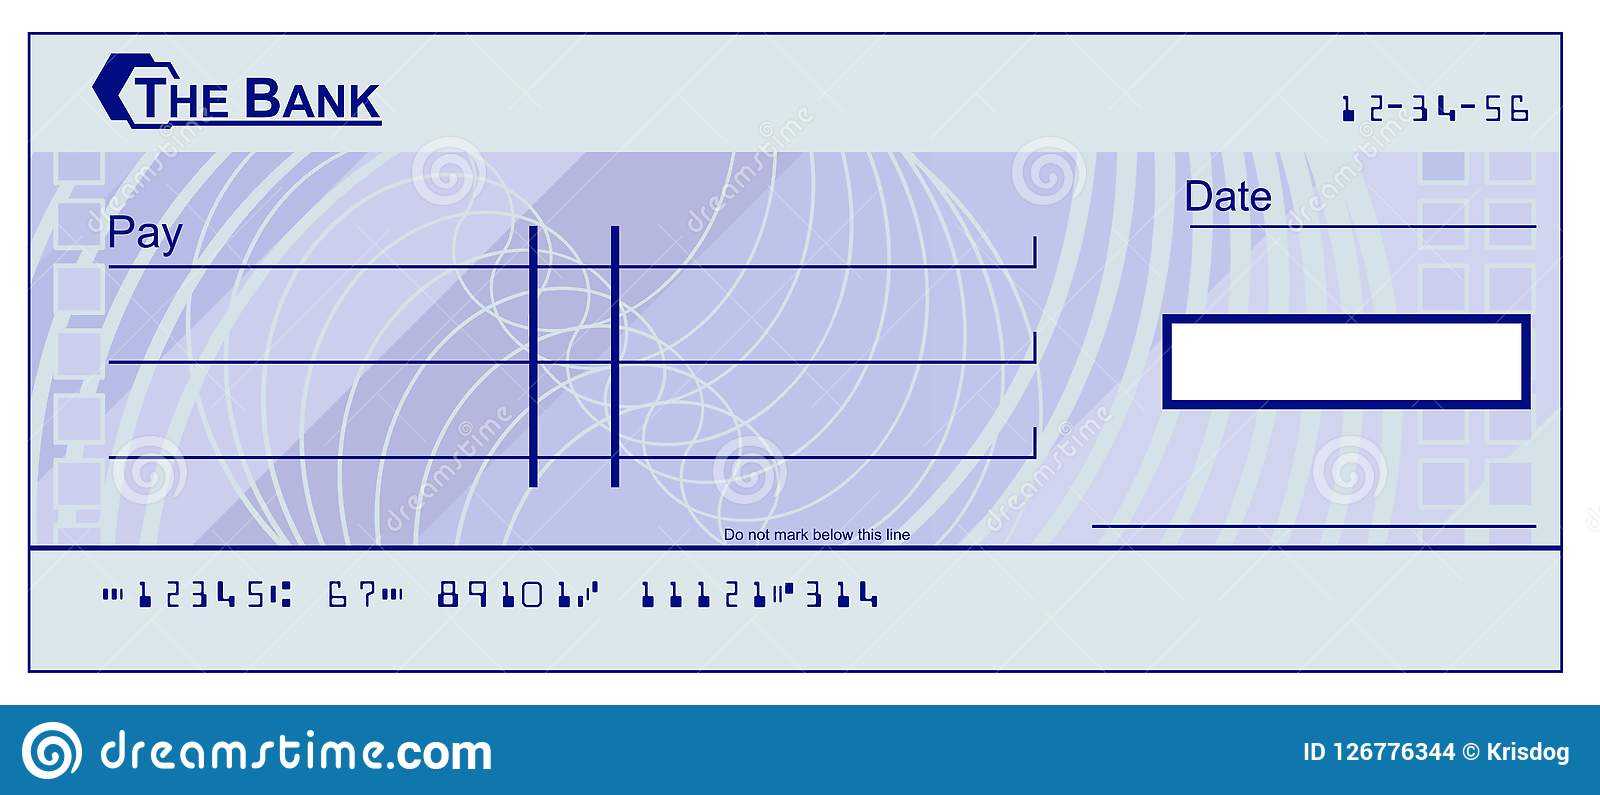 Blank Cheque Stock Vector. Illustration Of Finance, Blank With Blank Cheque Template Download Free